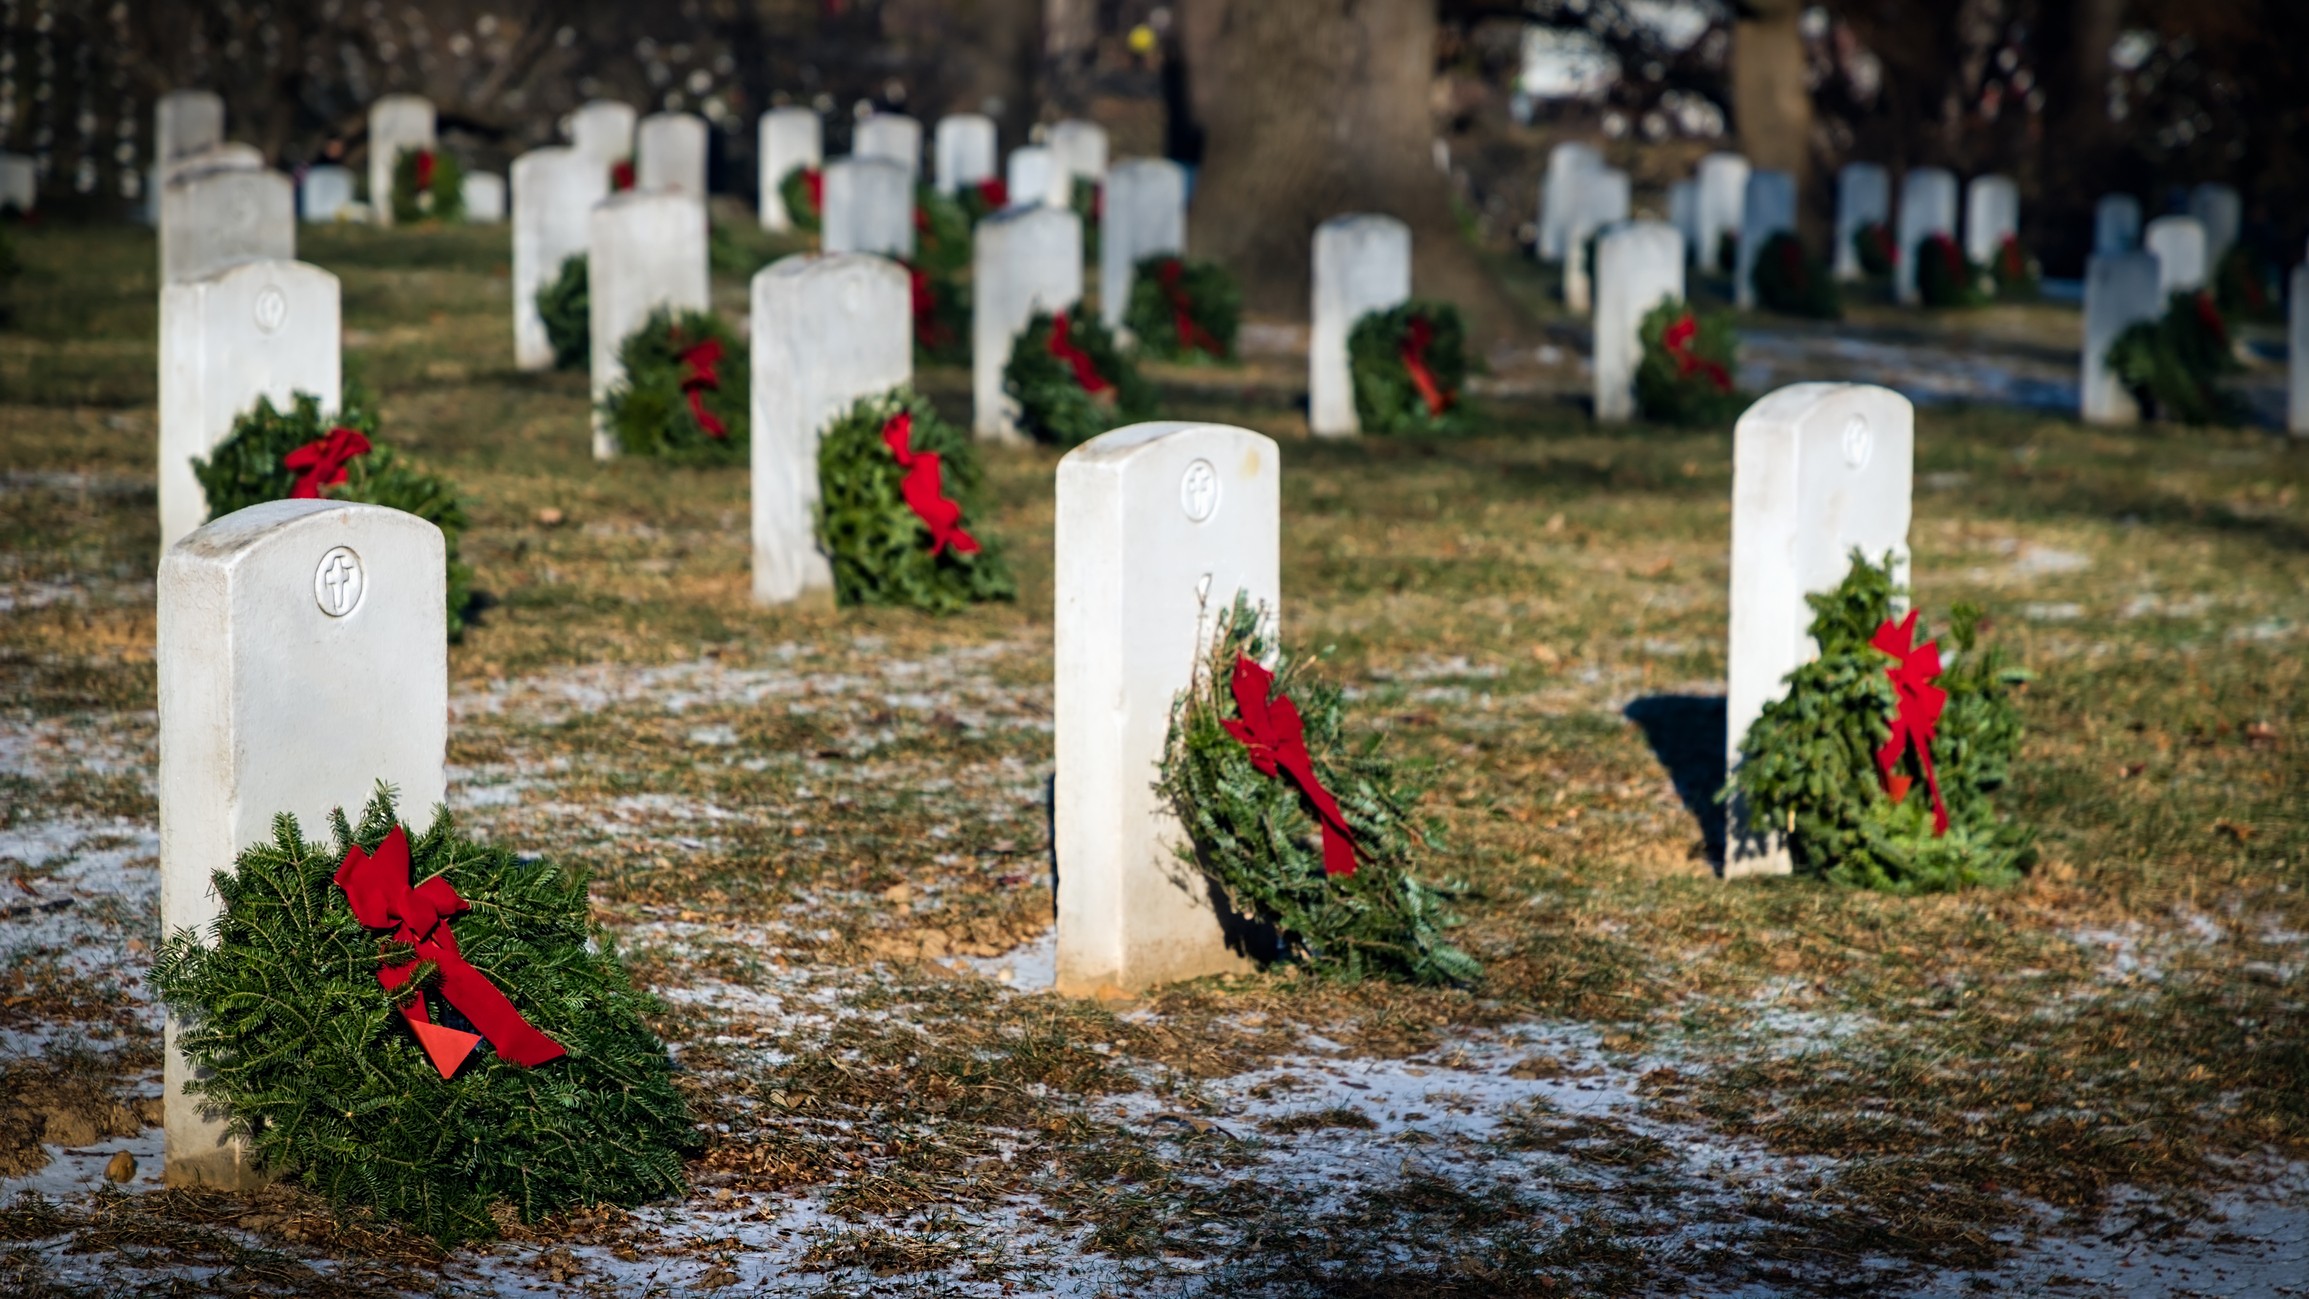 National Wreaths Across America Day - wreaths placed on veterans graves